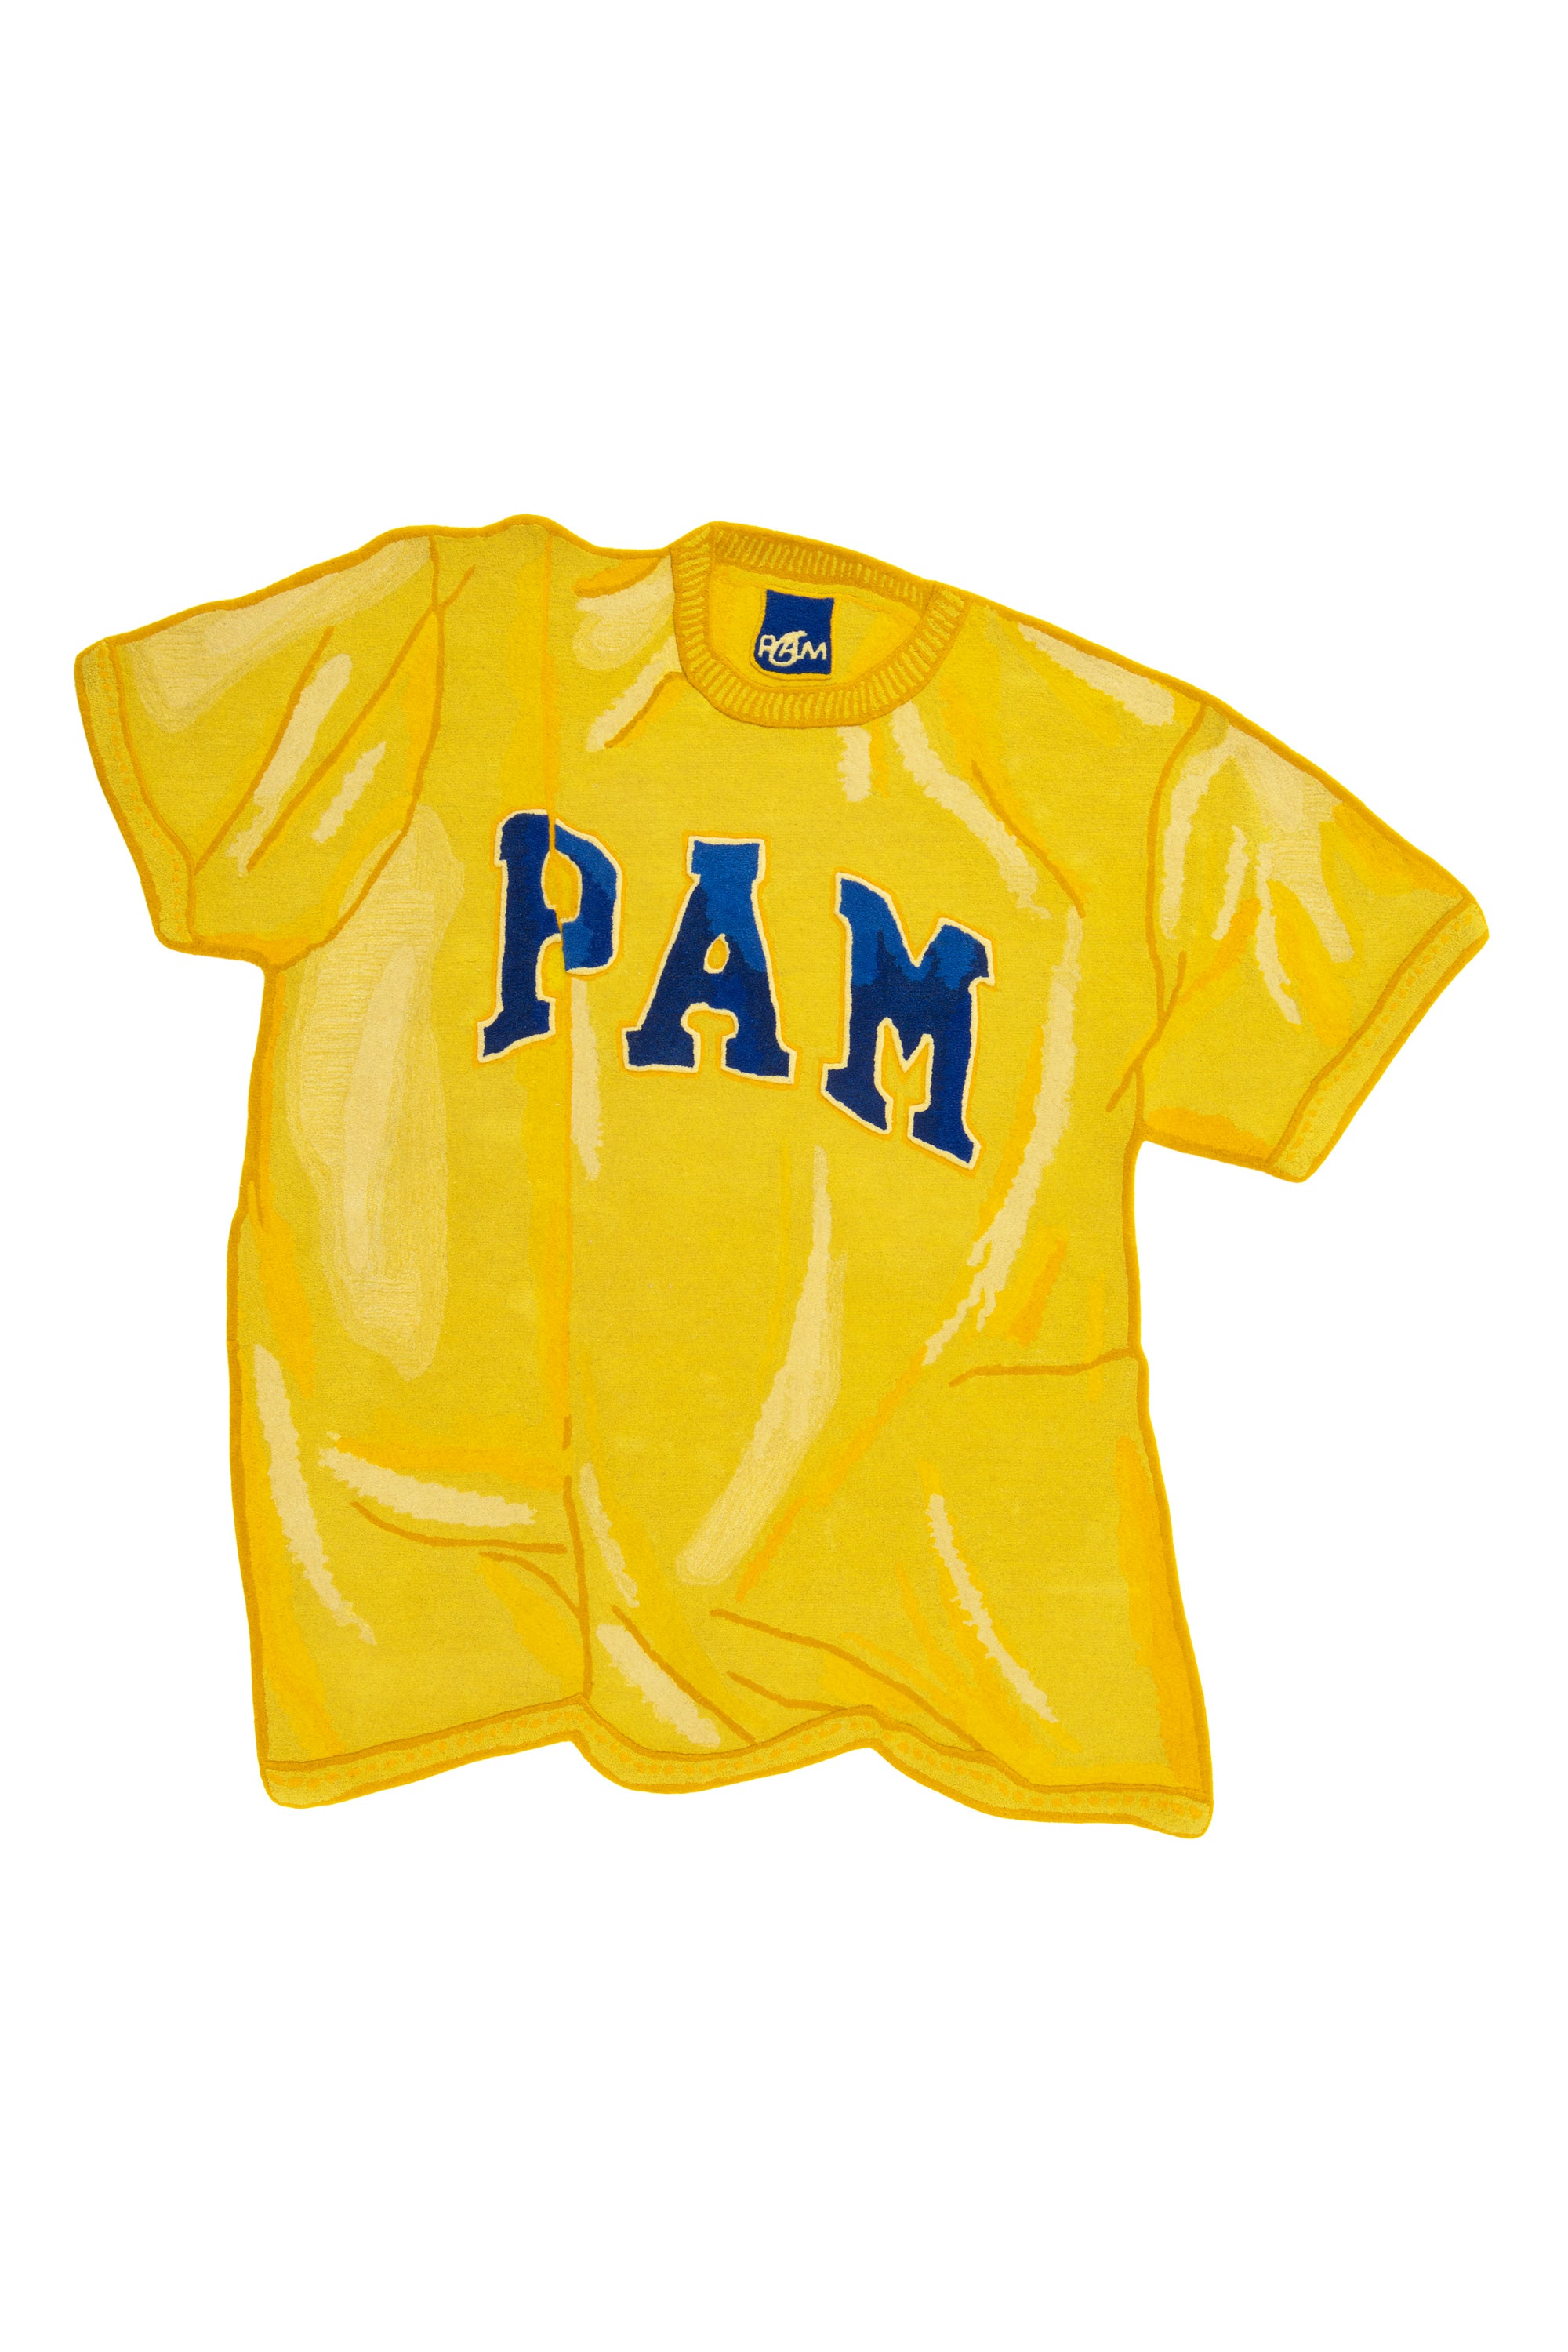 The CC-TAPIS x P.A.M. - 'P.A.M. LOGO TEE' RUG  available online with global shipping, and in PAM Stores Melbourne and Sydney.